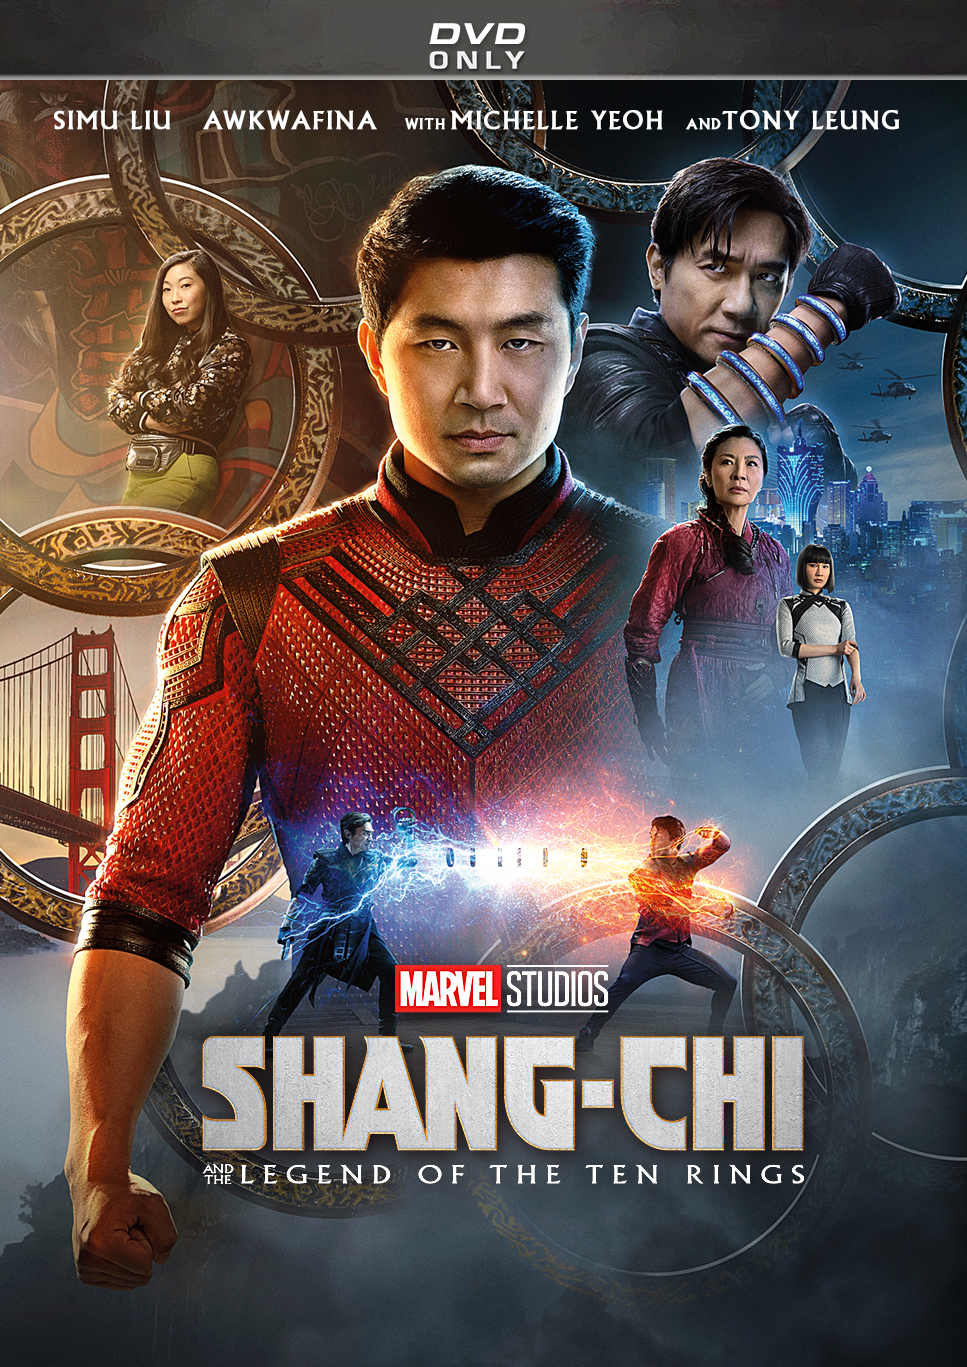 Shang-Chi and the Legend of the Ten Rings [DVD] [2021] - Best Buy